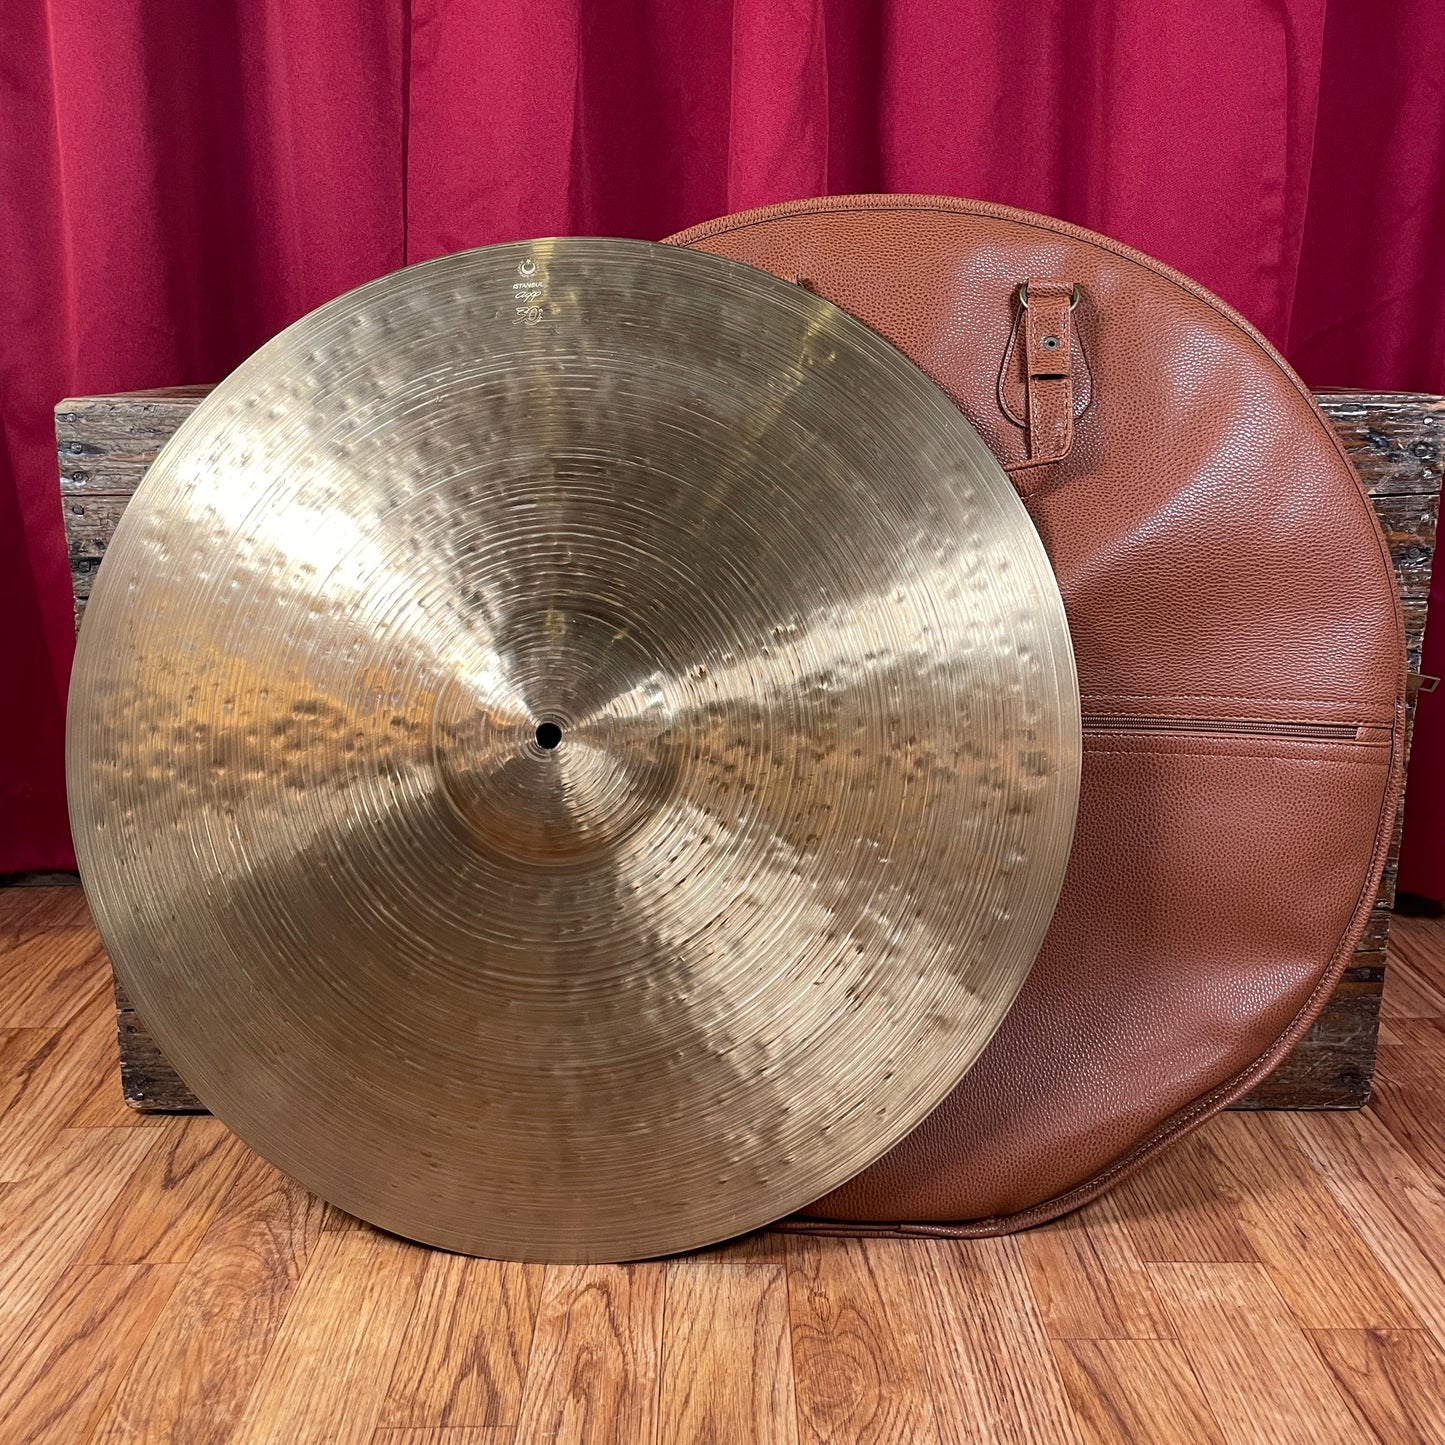 22" Istanbul Agop 30th Anniversary Ride Cymbal 2352g *Video Demo*